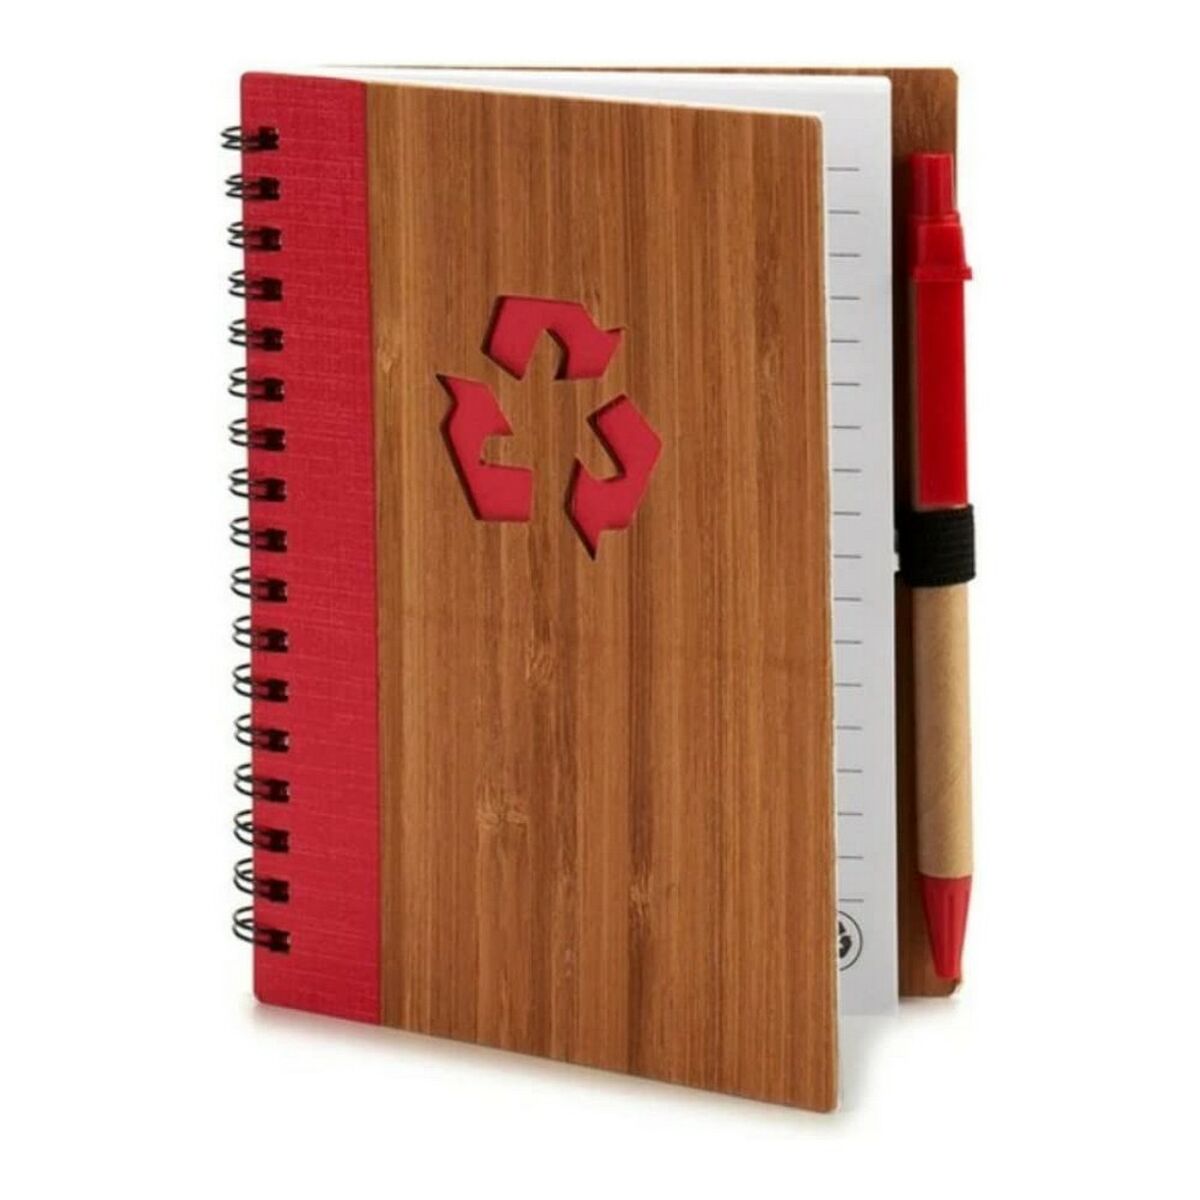 Spiral Notebook with Pen 8430852290649 Multicolour